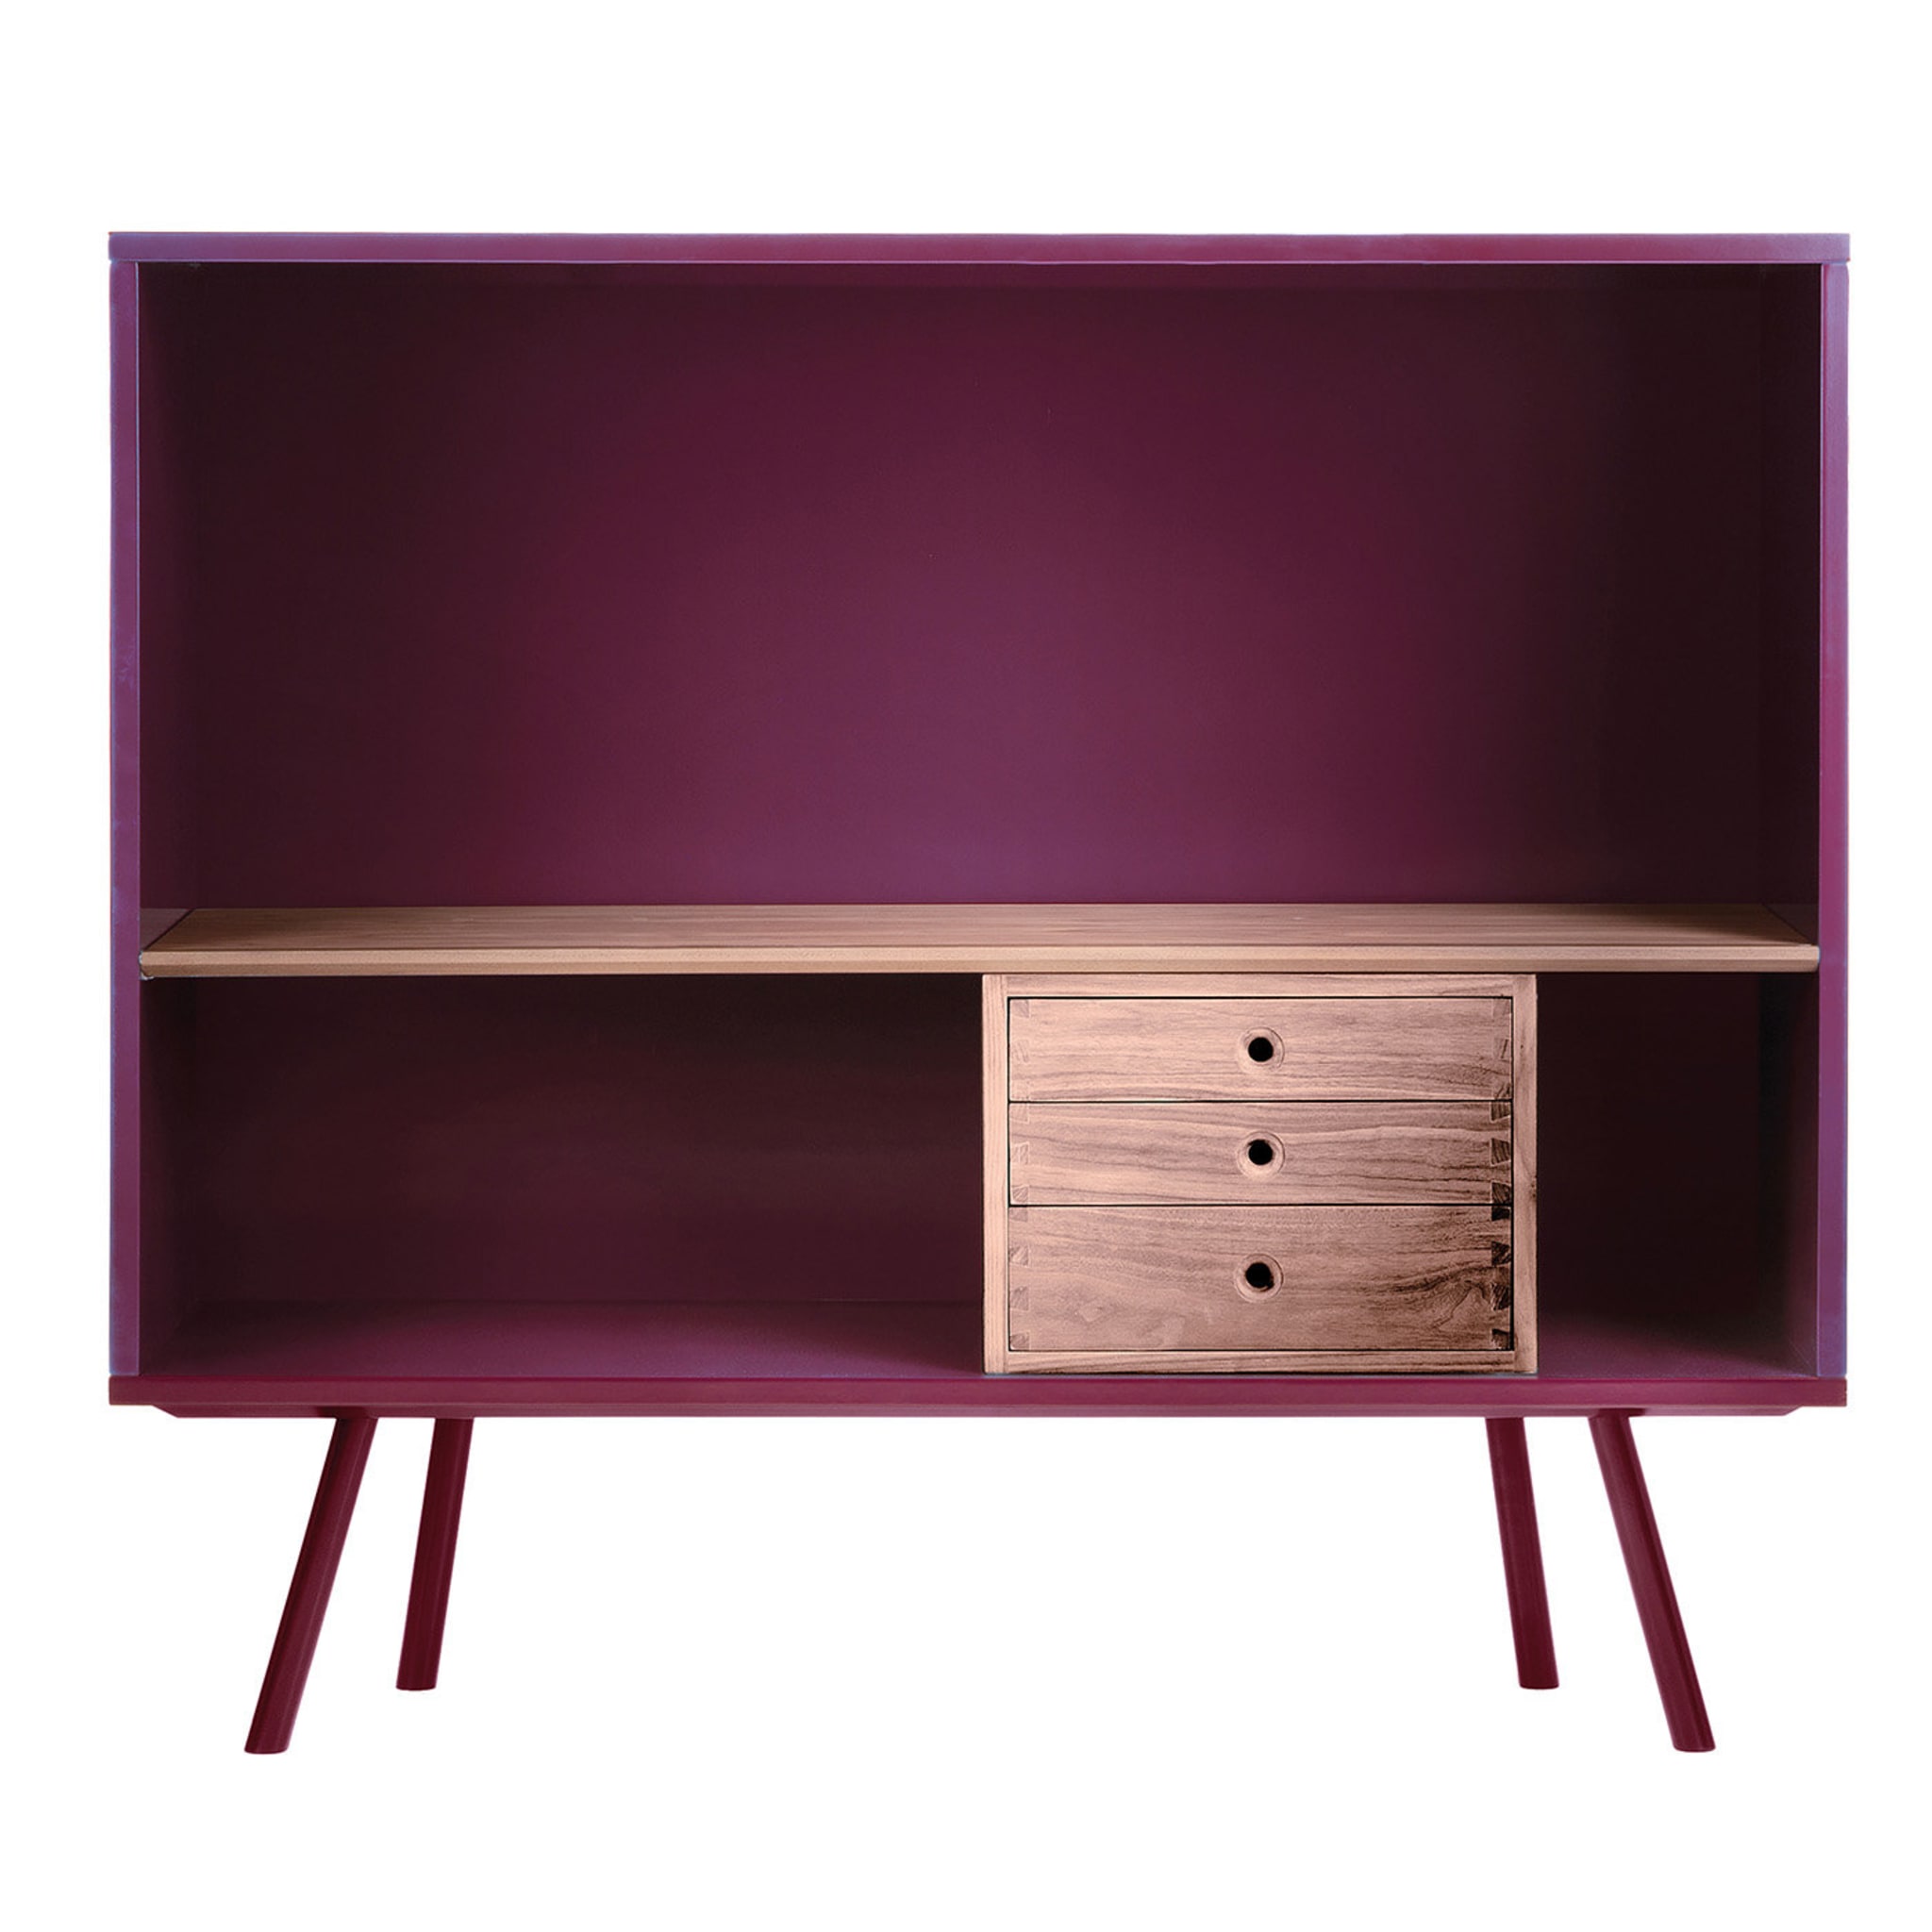 Casson Rectangular Open Cupboard with Drawers by Daniele della Porta - Main view